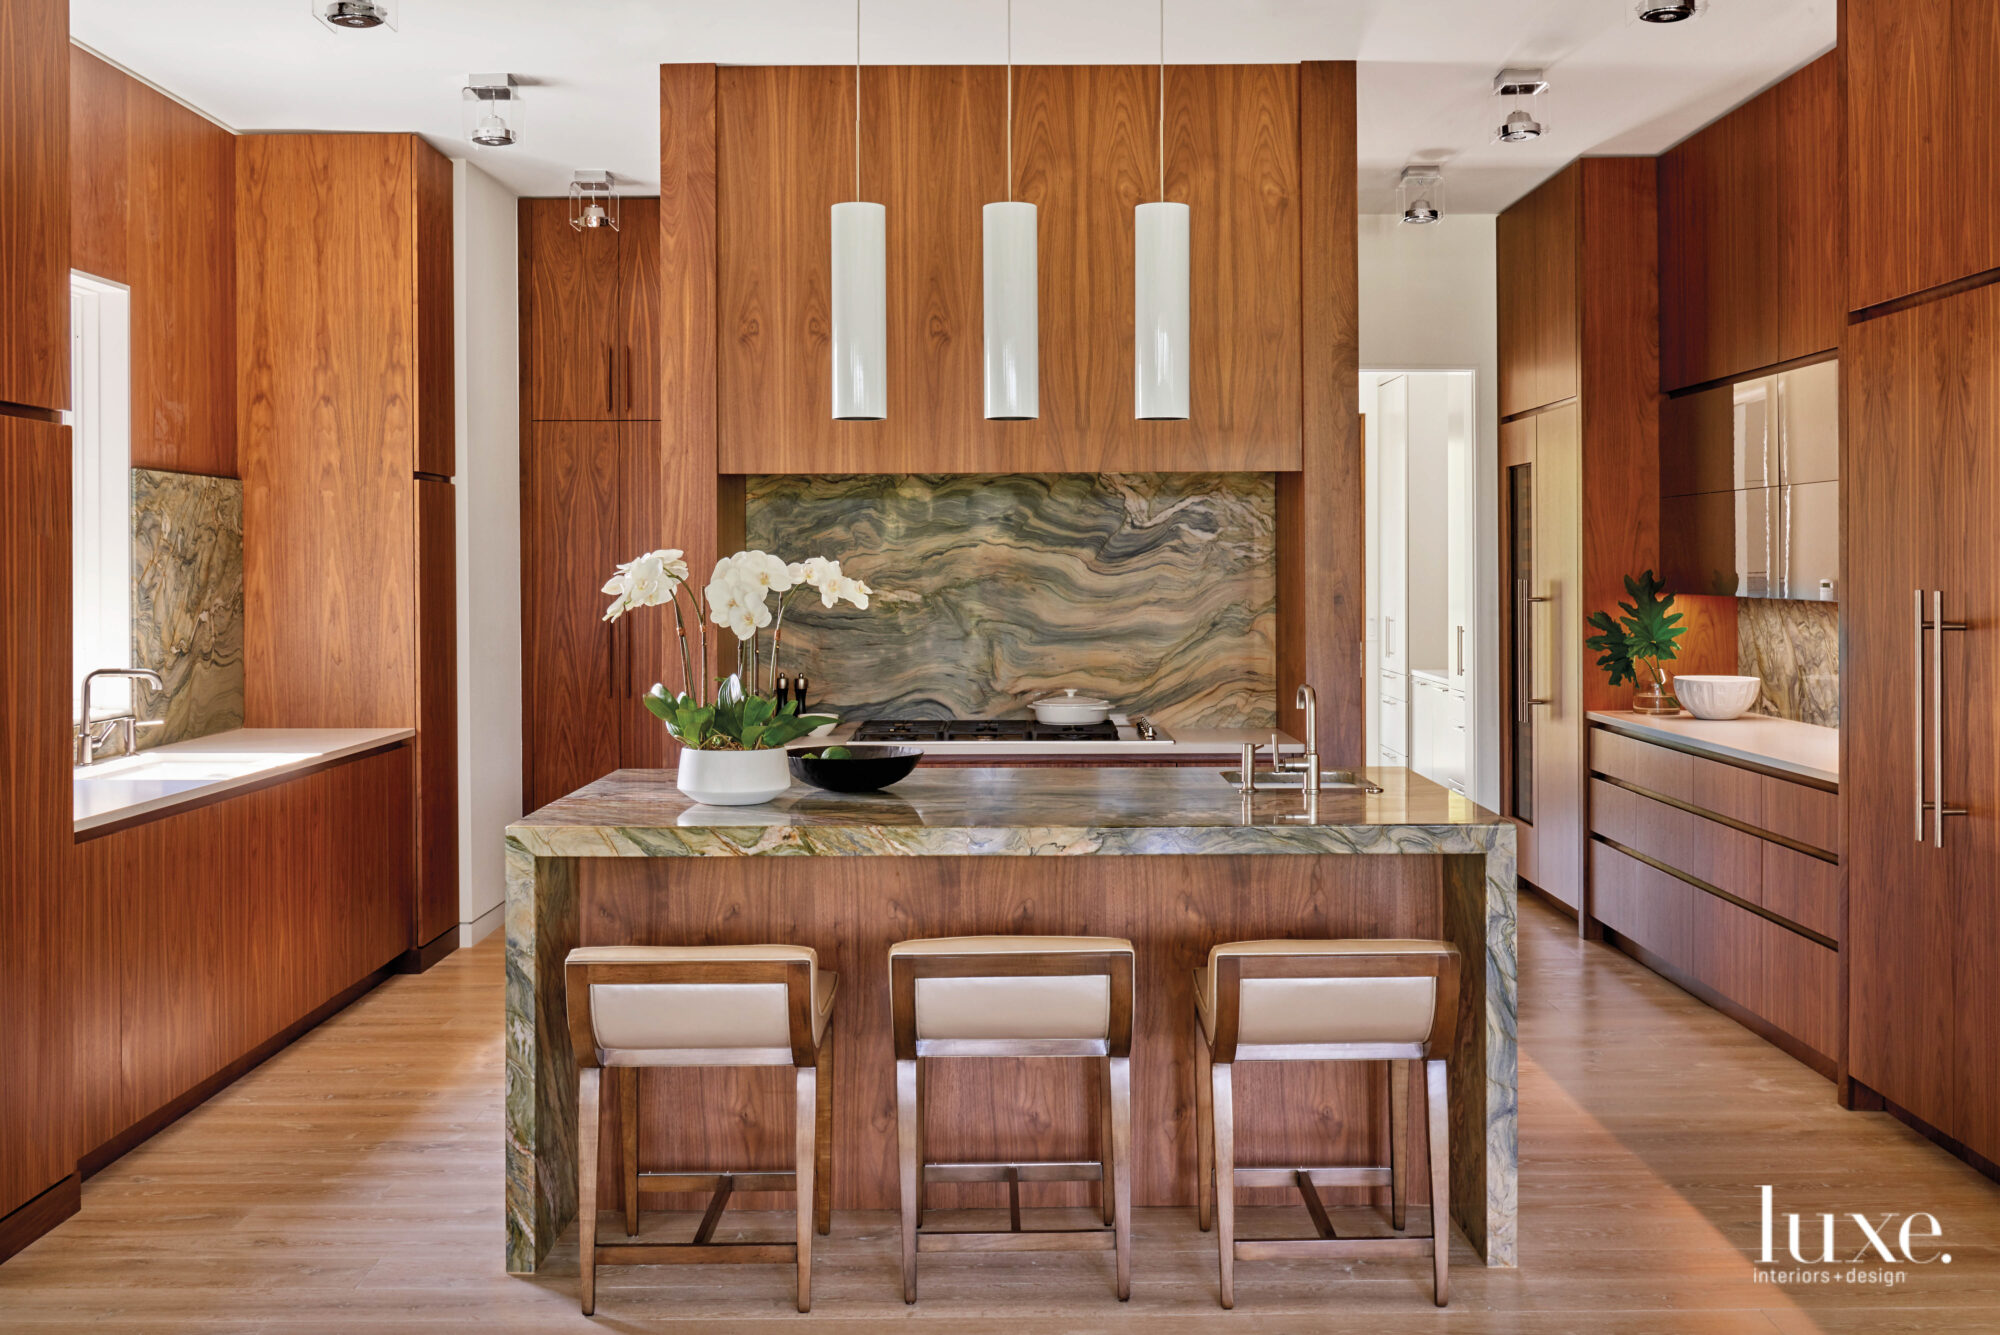 Rich Wood Accents Take Center Stage In This Coastal Kitchen